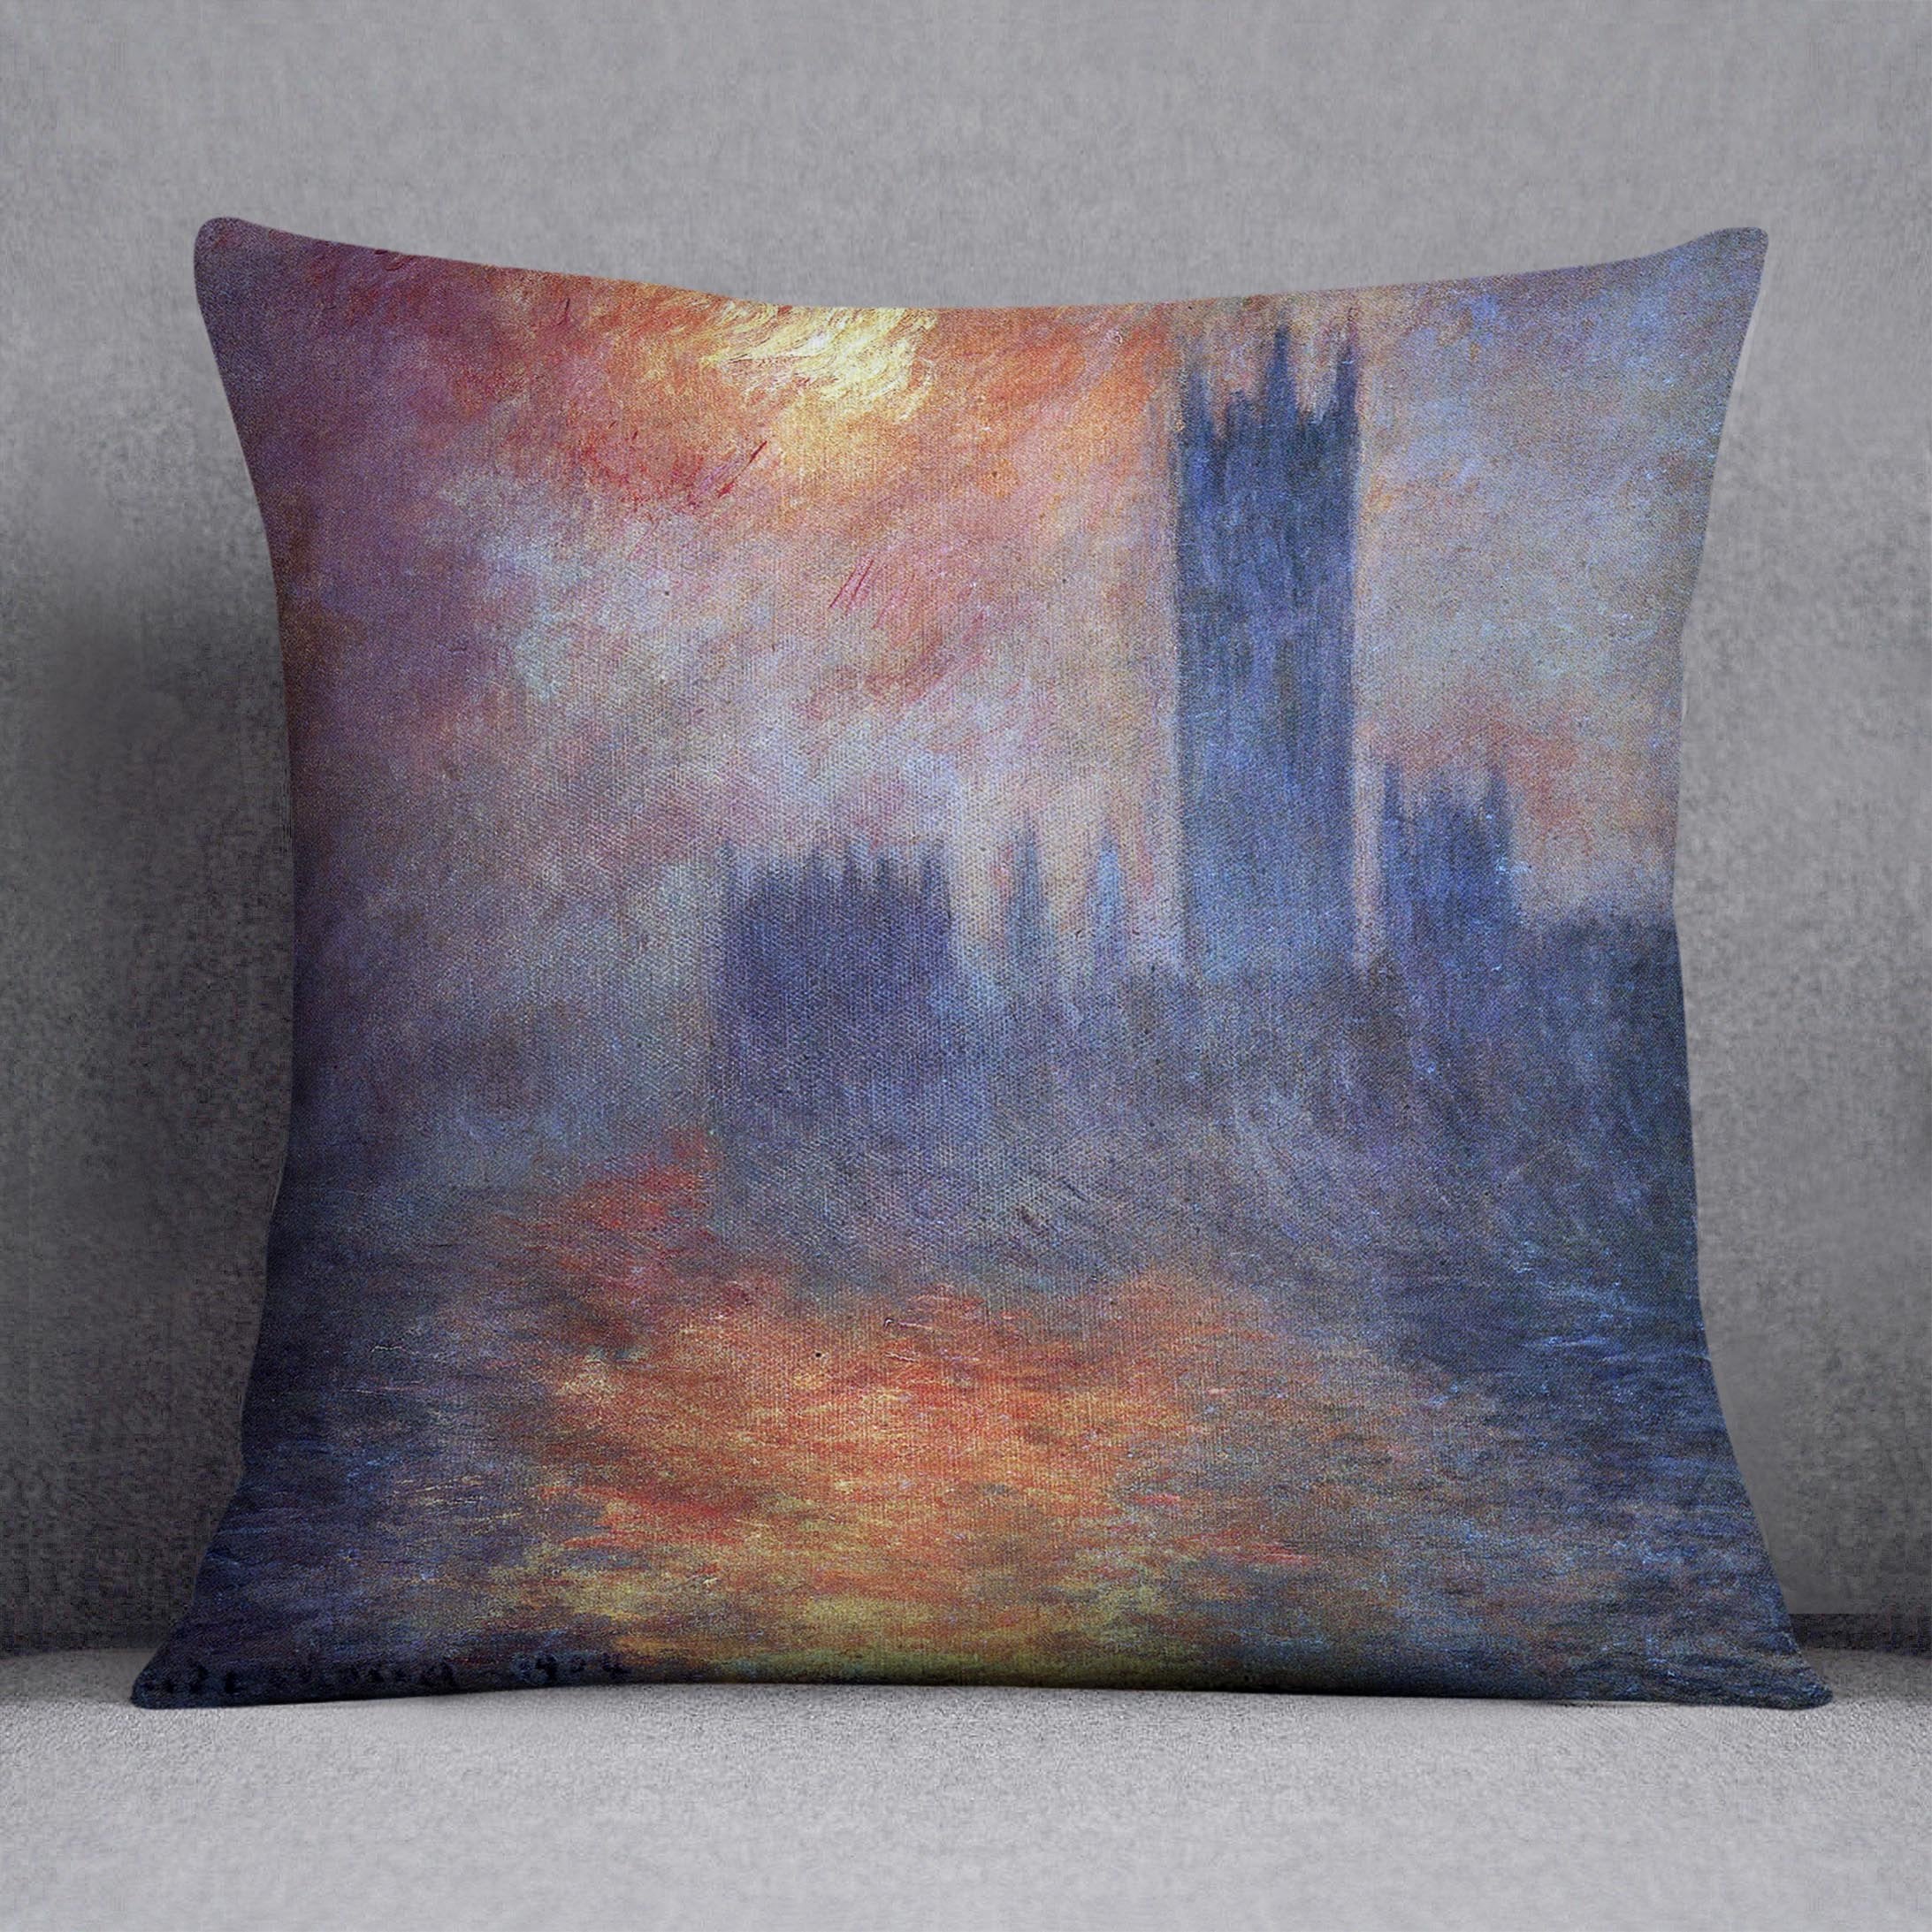 The Houses of Parliament Sunset by Monet Throw Pillow